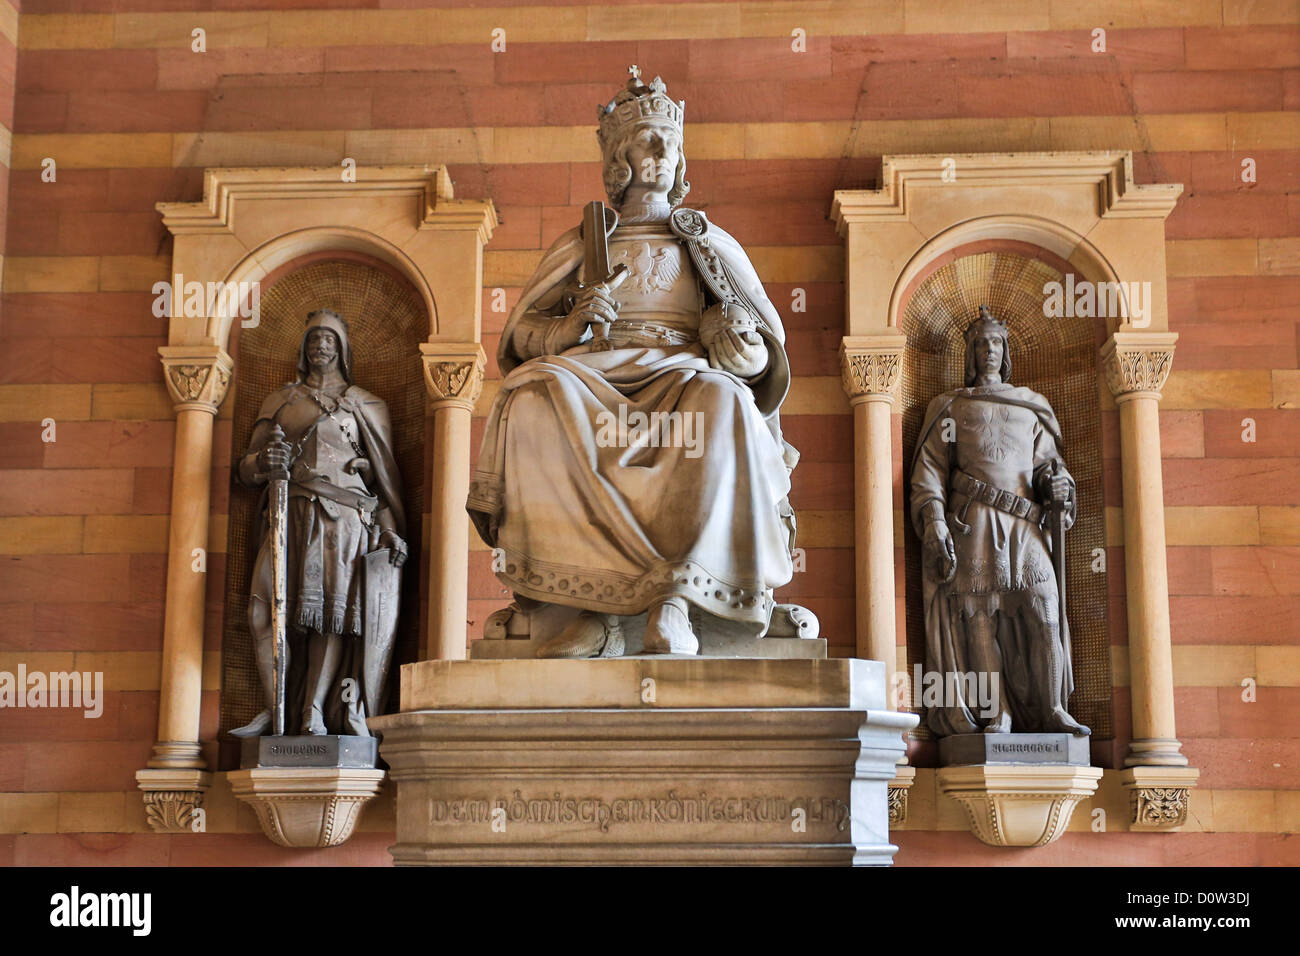 Germany, Europe, travel, Speyer, Imperial, Cathedral, world heritage, Emperor, statue, architecture, art, Charlemagne, sculpture Stock Photo